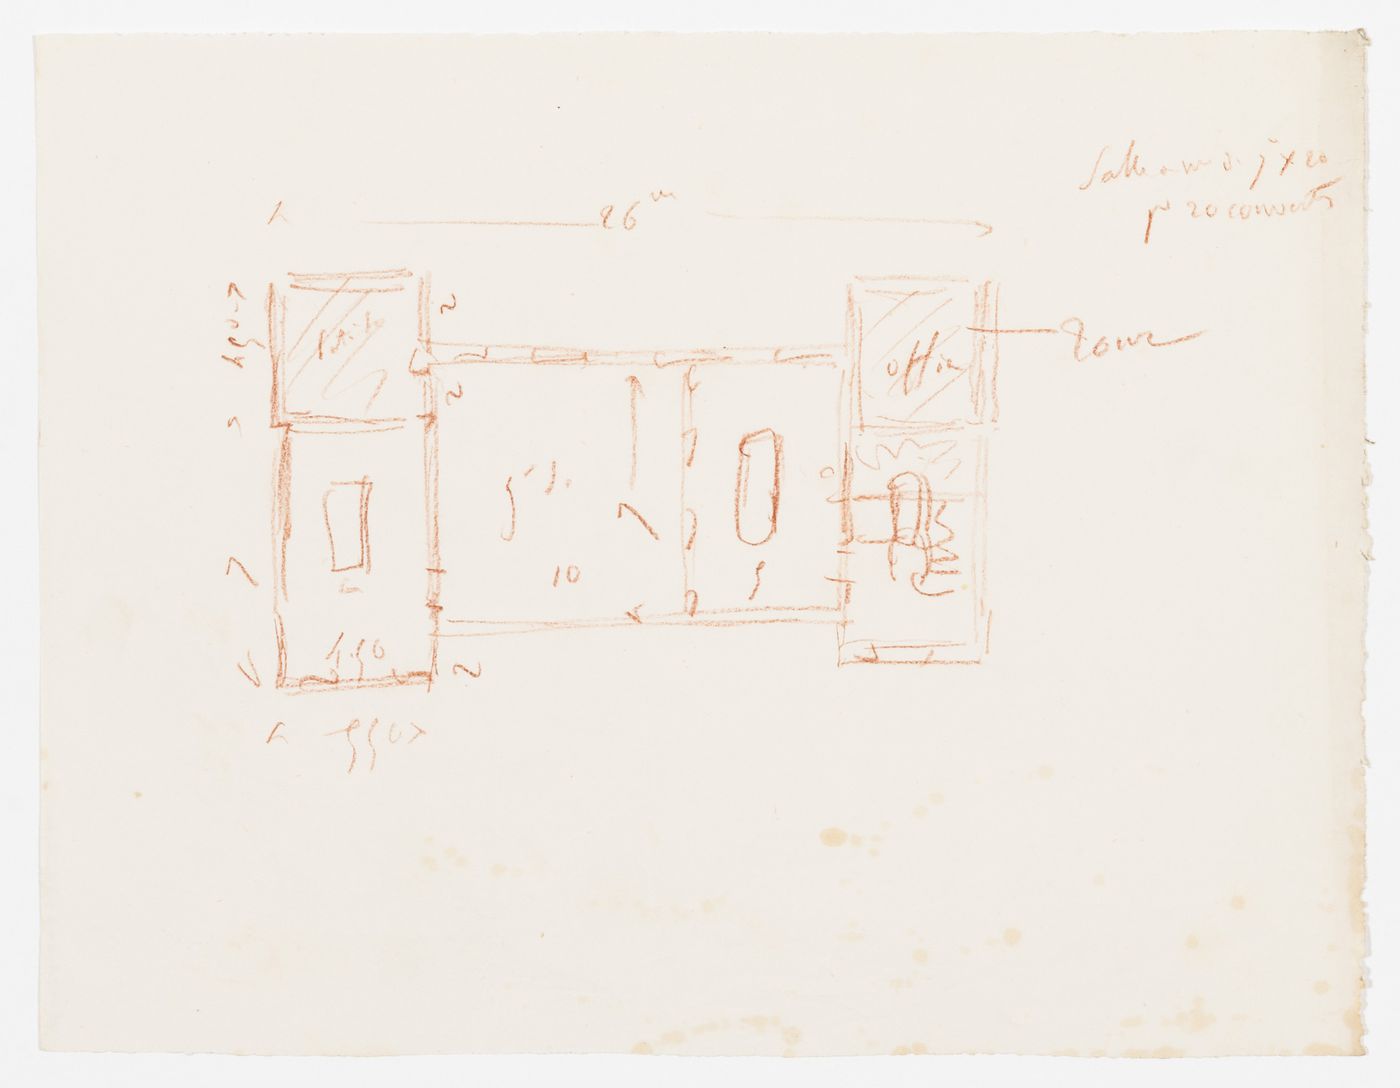 Project no. 4 for a country house for comte Treilhard: Sketch plan, probably for the ground floor